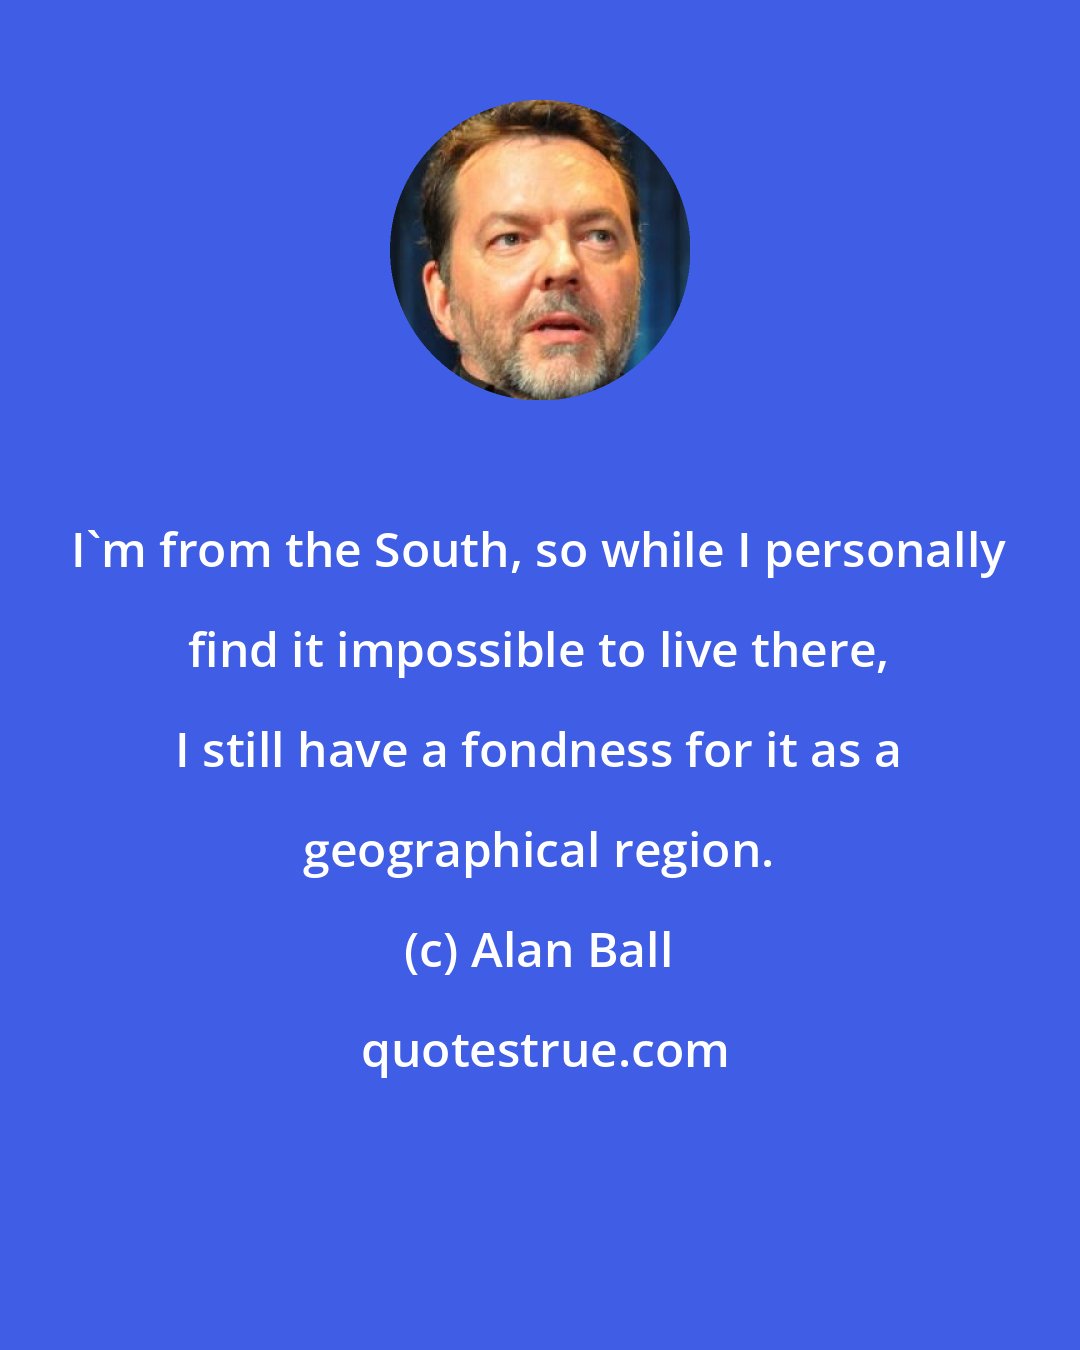 Alan Ball: I'm from the South, so while I personally find it impossible to live there, I still have a fondness for it as a geographical region.